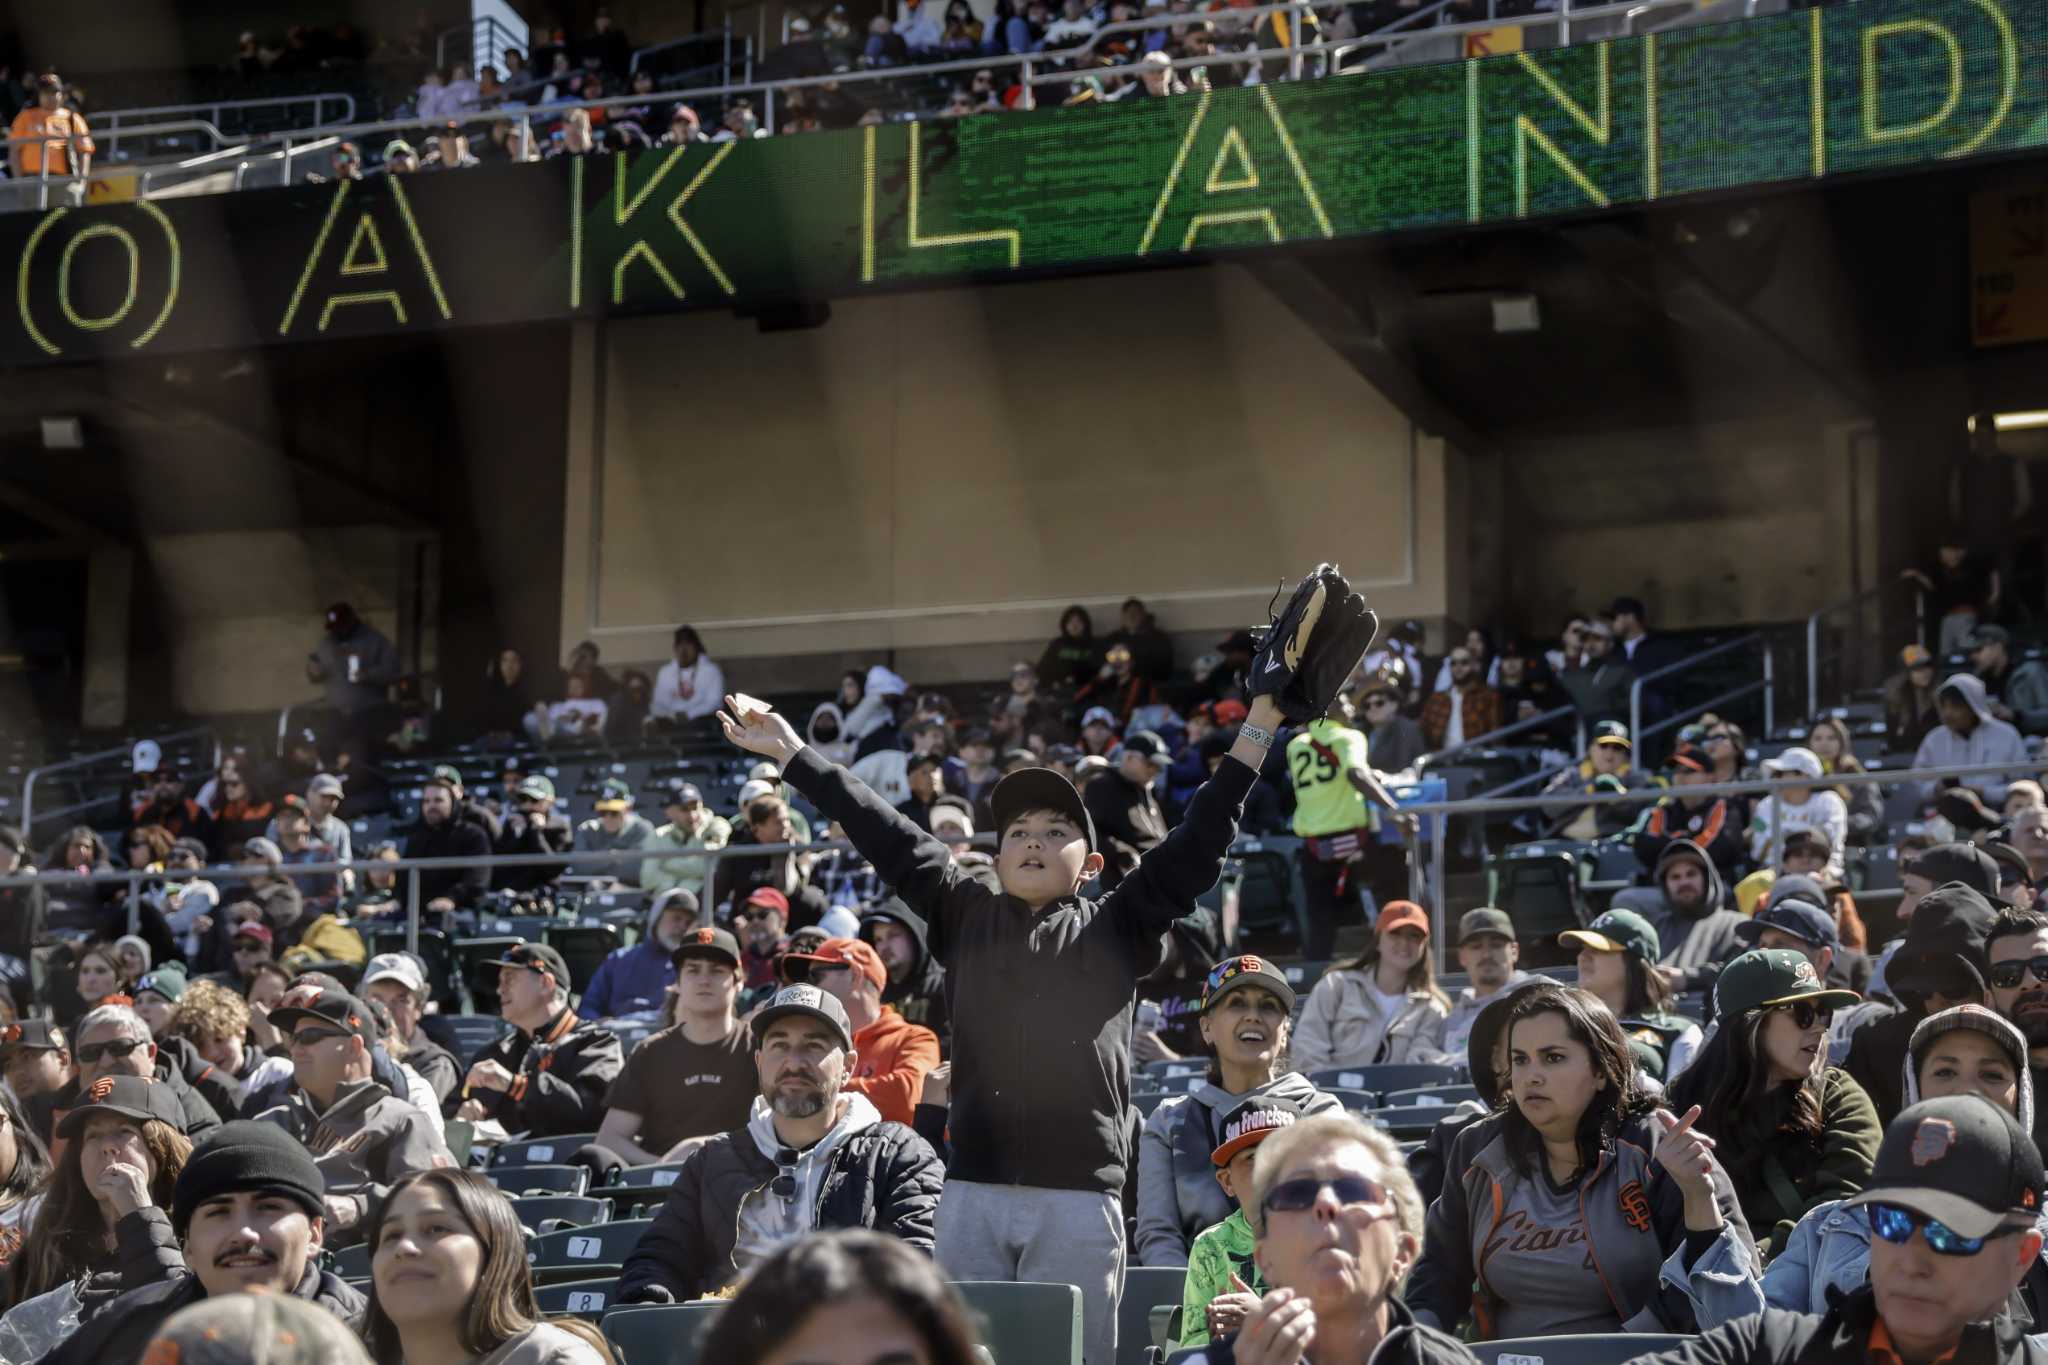 SF Giants, Oakland A's: What fans can expect on Opening Day